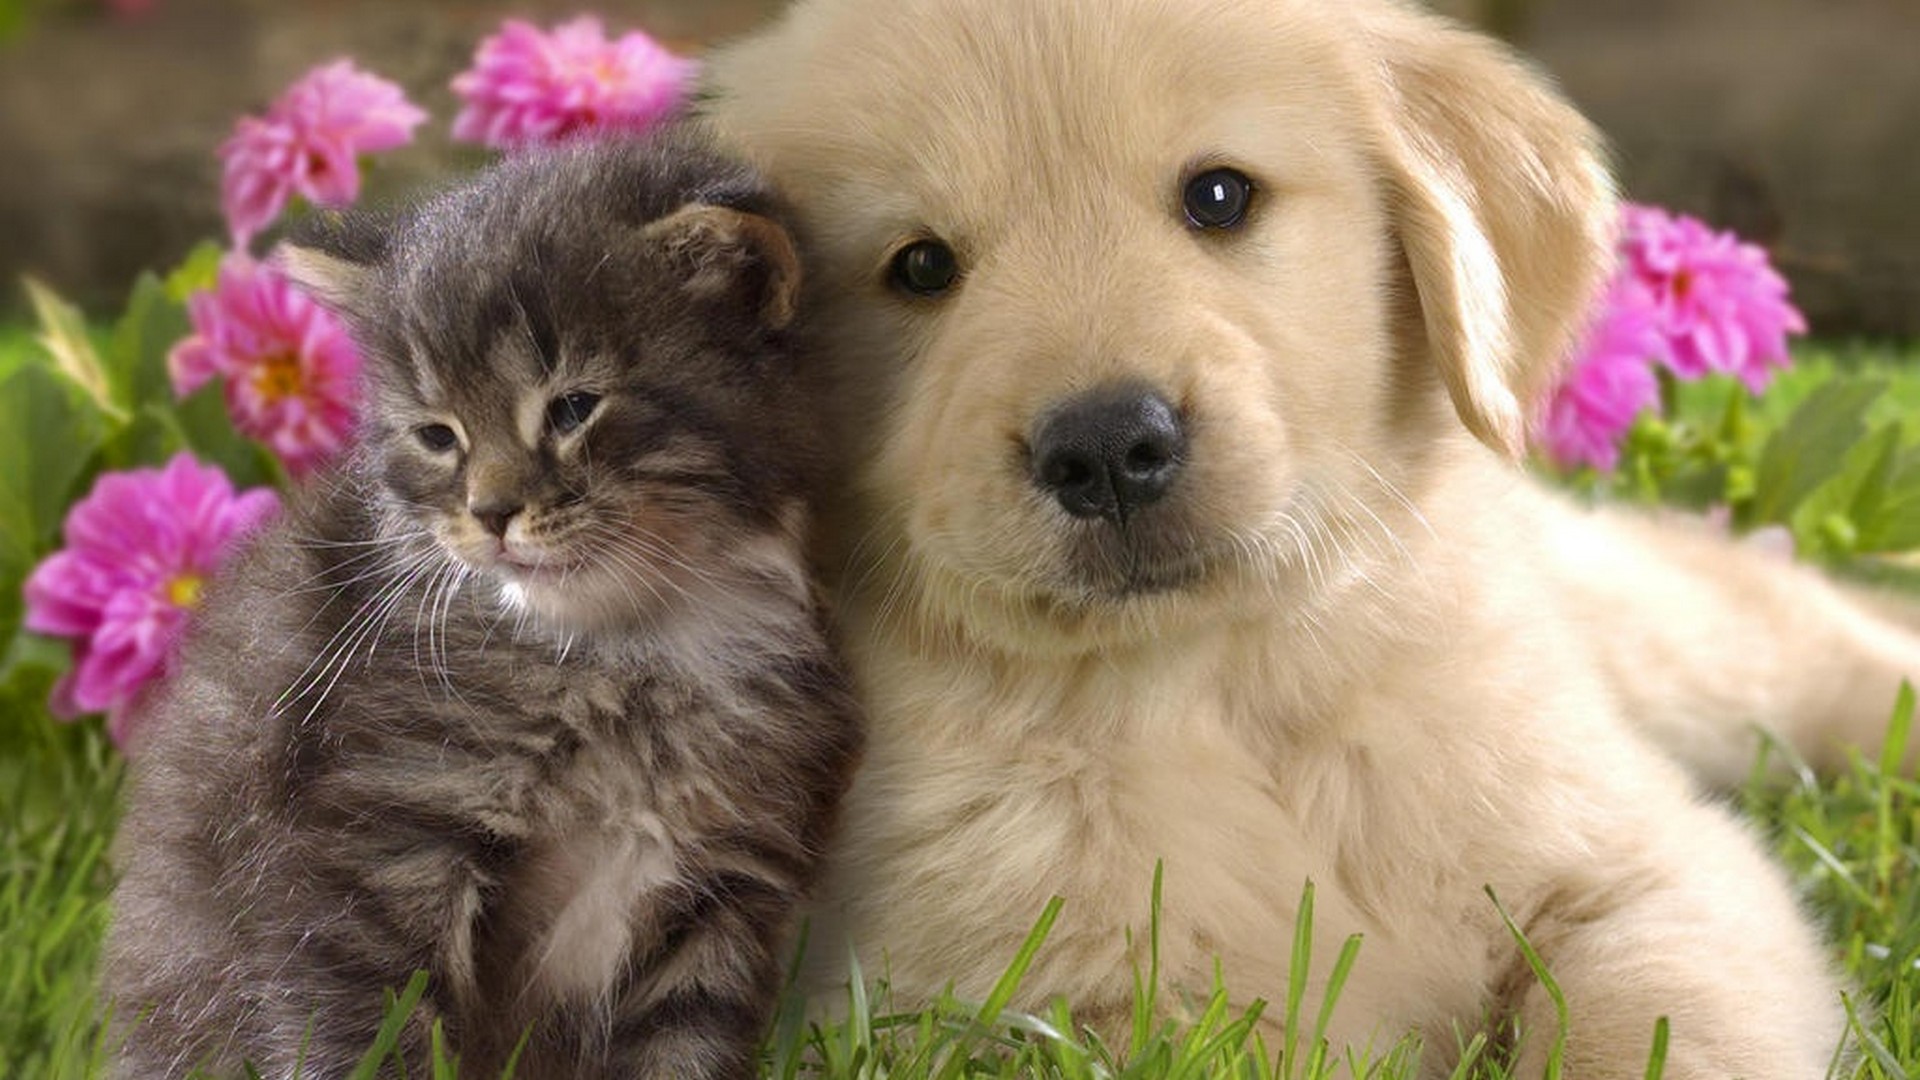 Cute Puppies Pictures Wallpaper HD 1920x1080